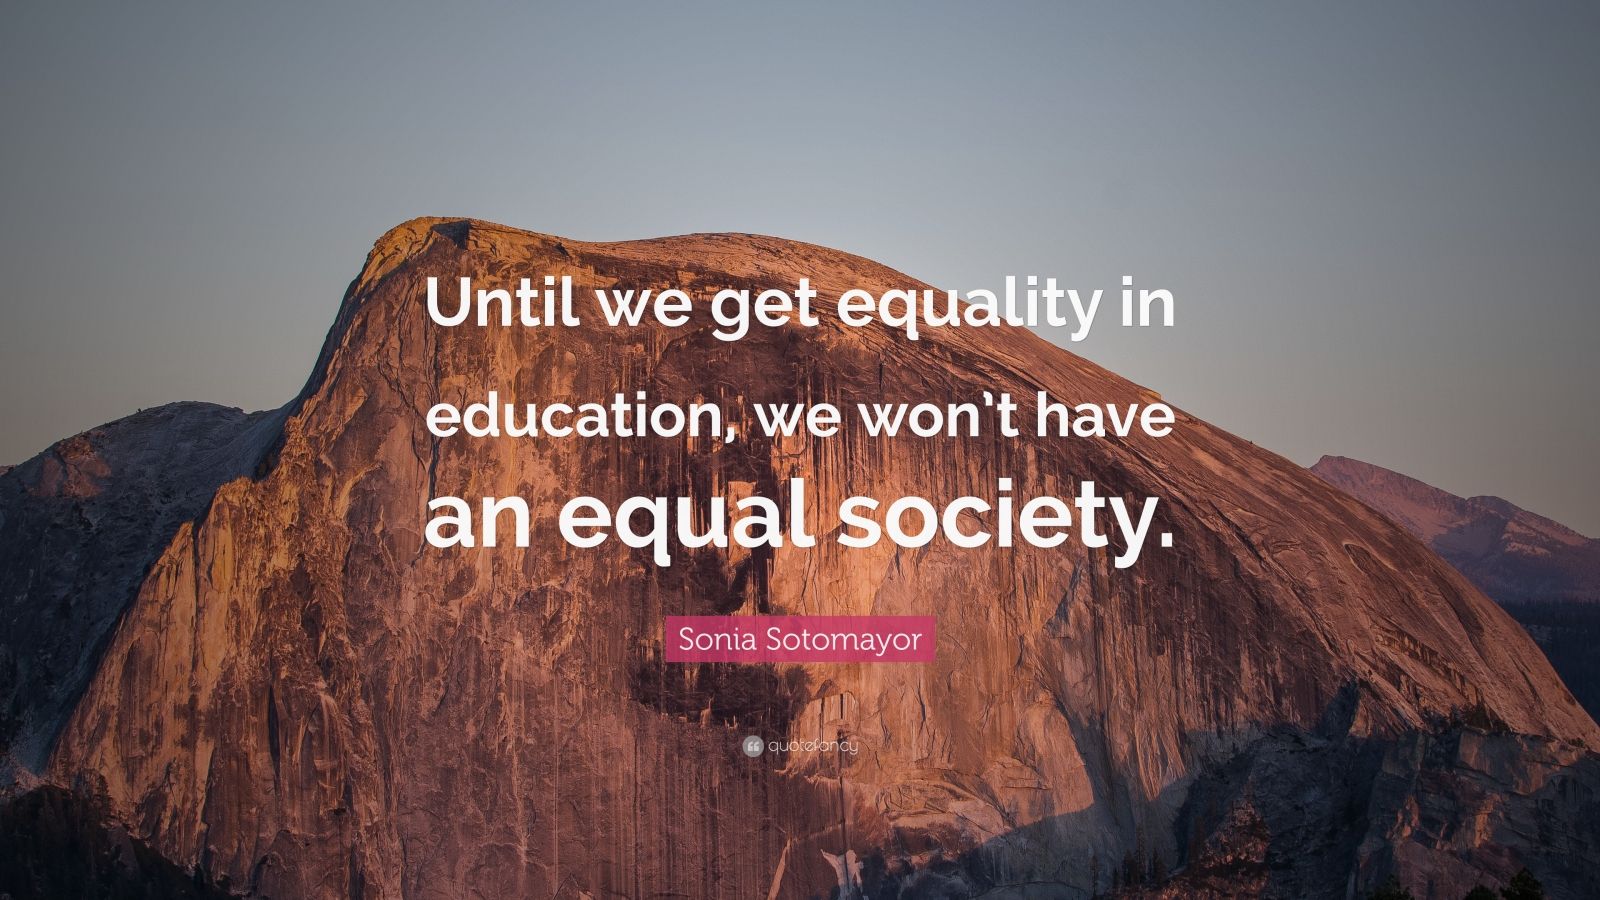 Sonia Sotomayor Quote: “Until we get equality in education, we won’t